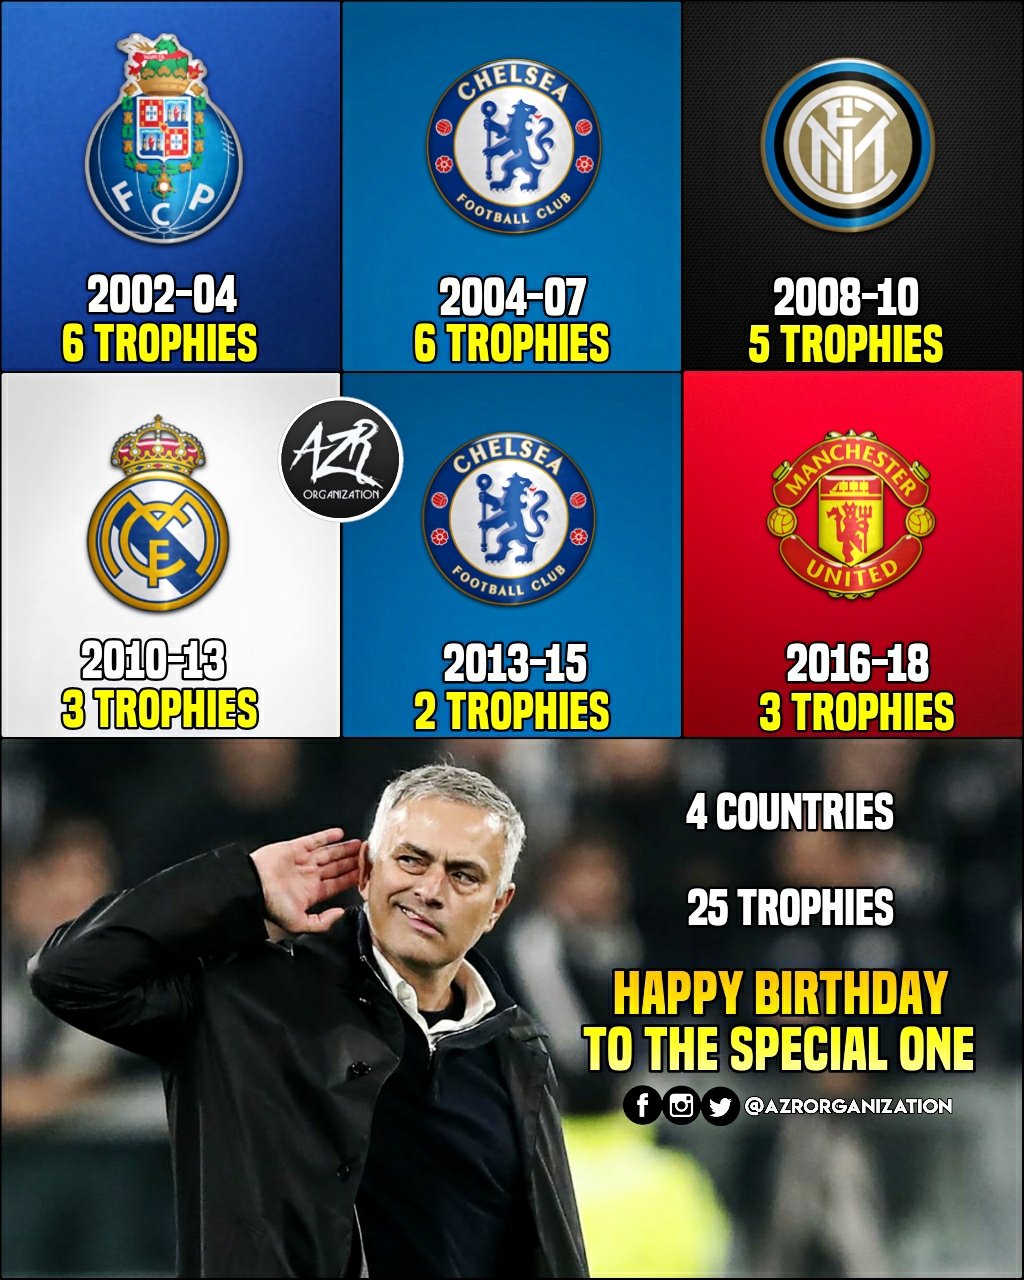 Happy Birthday To One Of The Greatest Managers Of Our Generation - Jose Mourinho!   